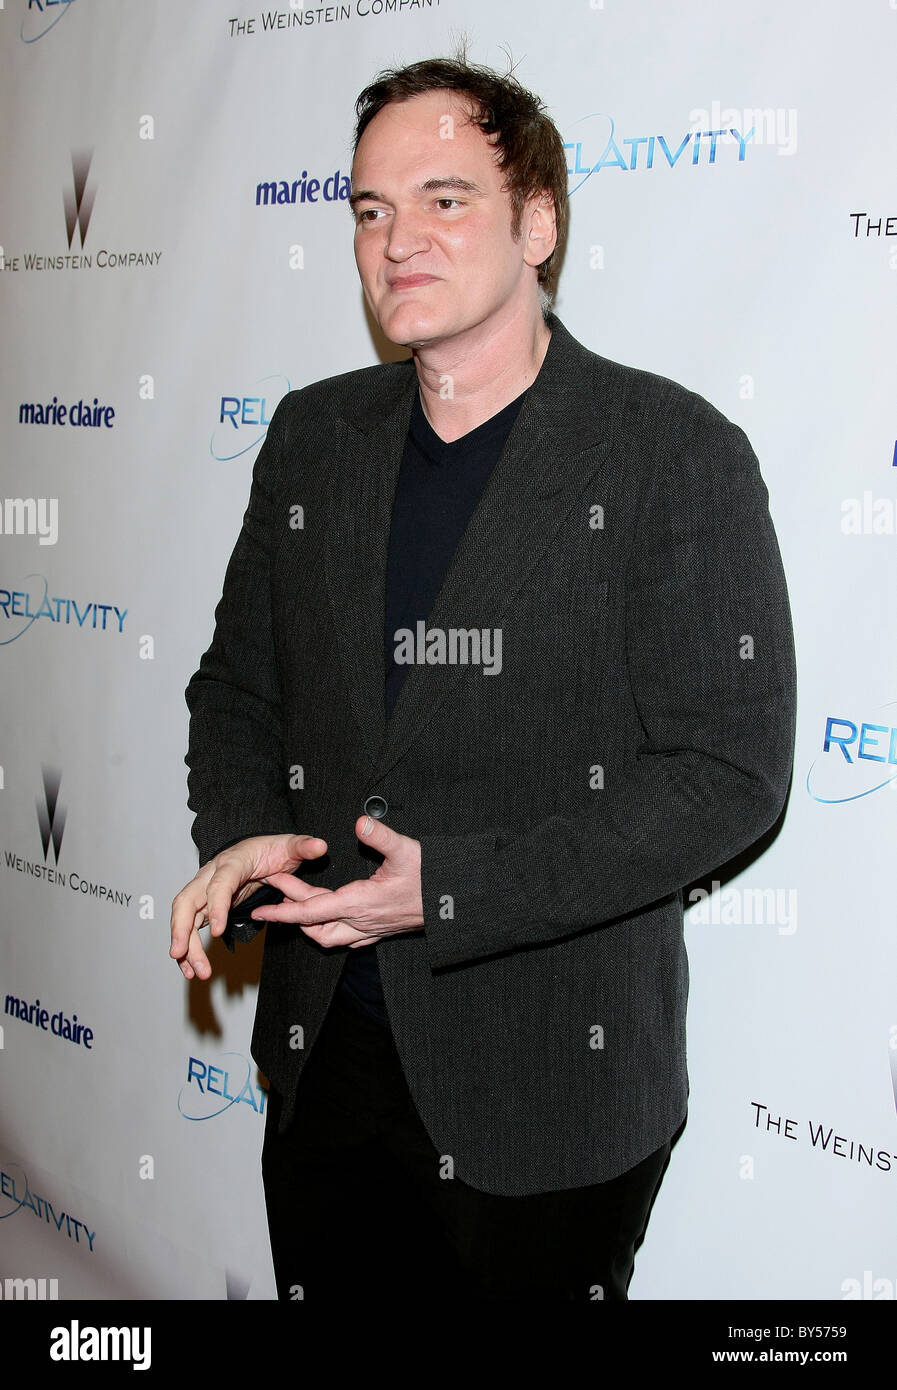 QUENTIN TARANTINO RELATIVITY MEDIA AND THE WEINSTEIN COMPANY 2011 GOLDEN GLOBES AFTER PARTY BEVERLY HILLS LOS ANGELES CALIFORN Stock Photo